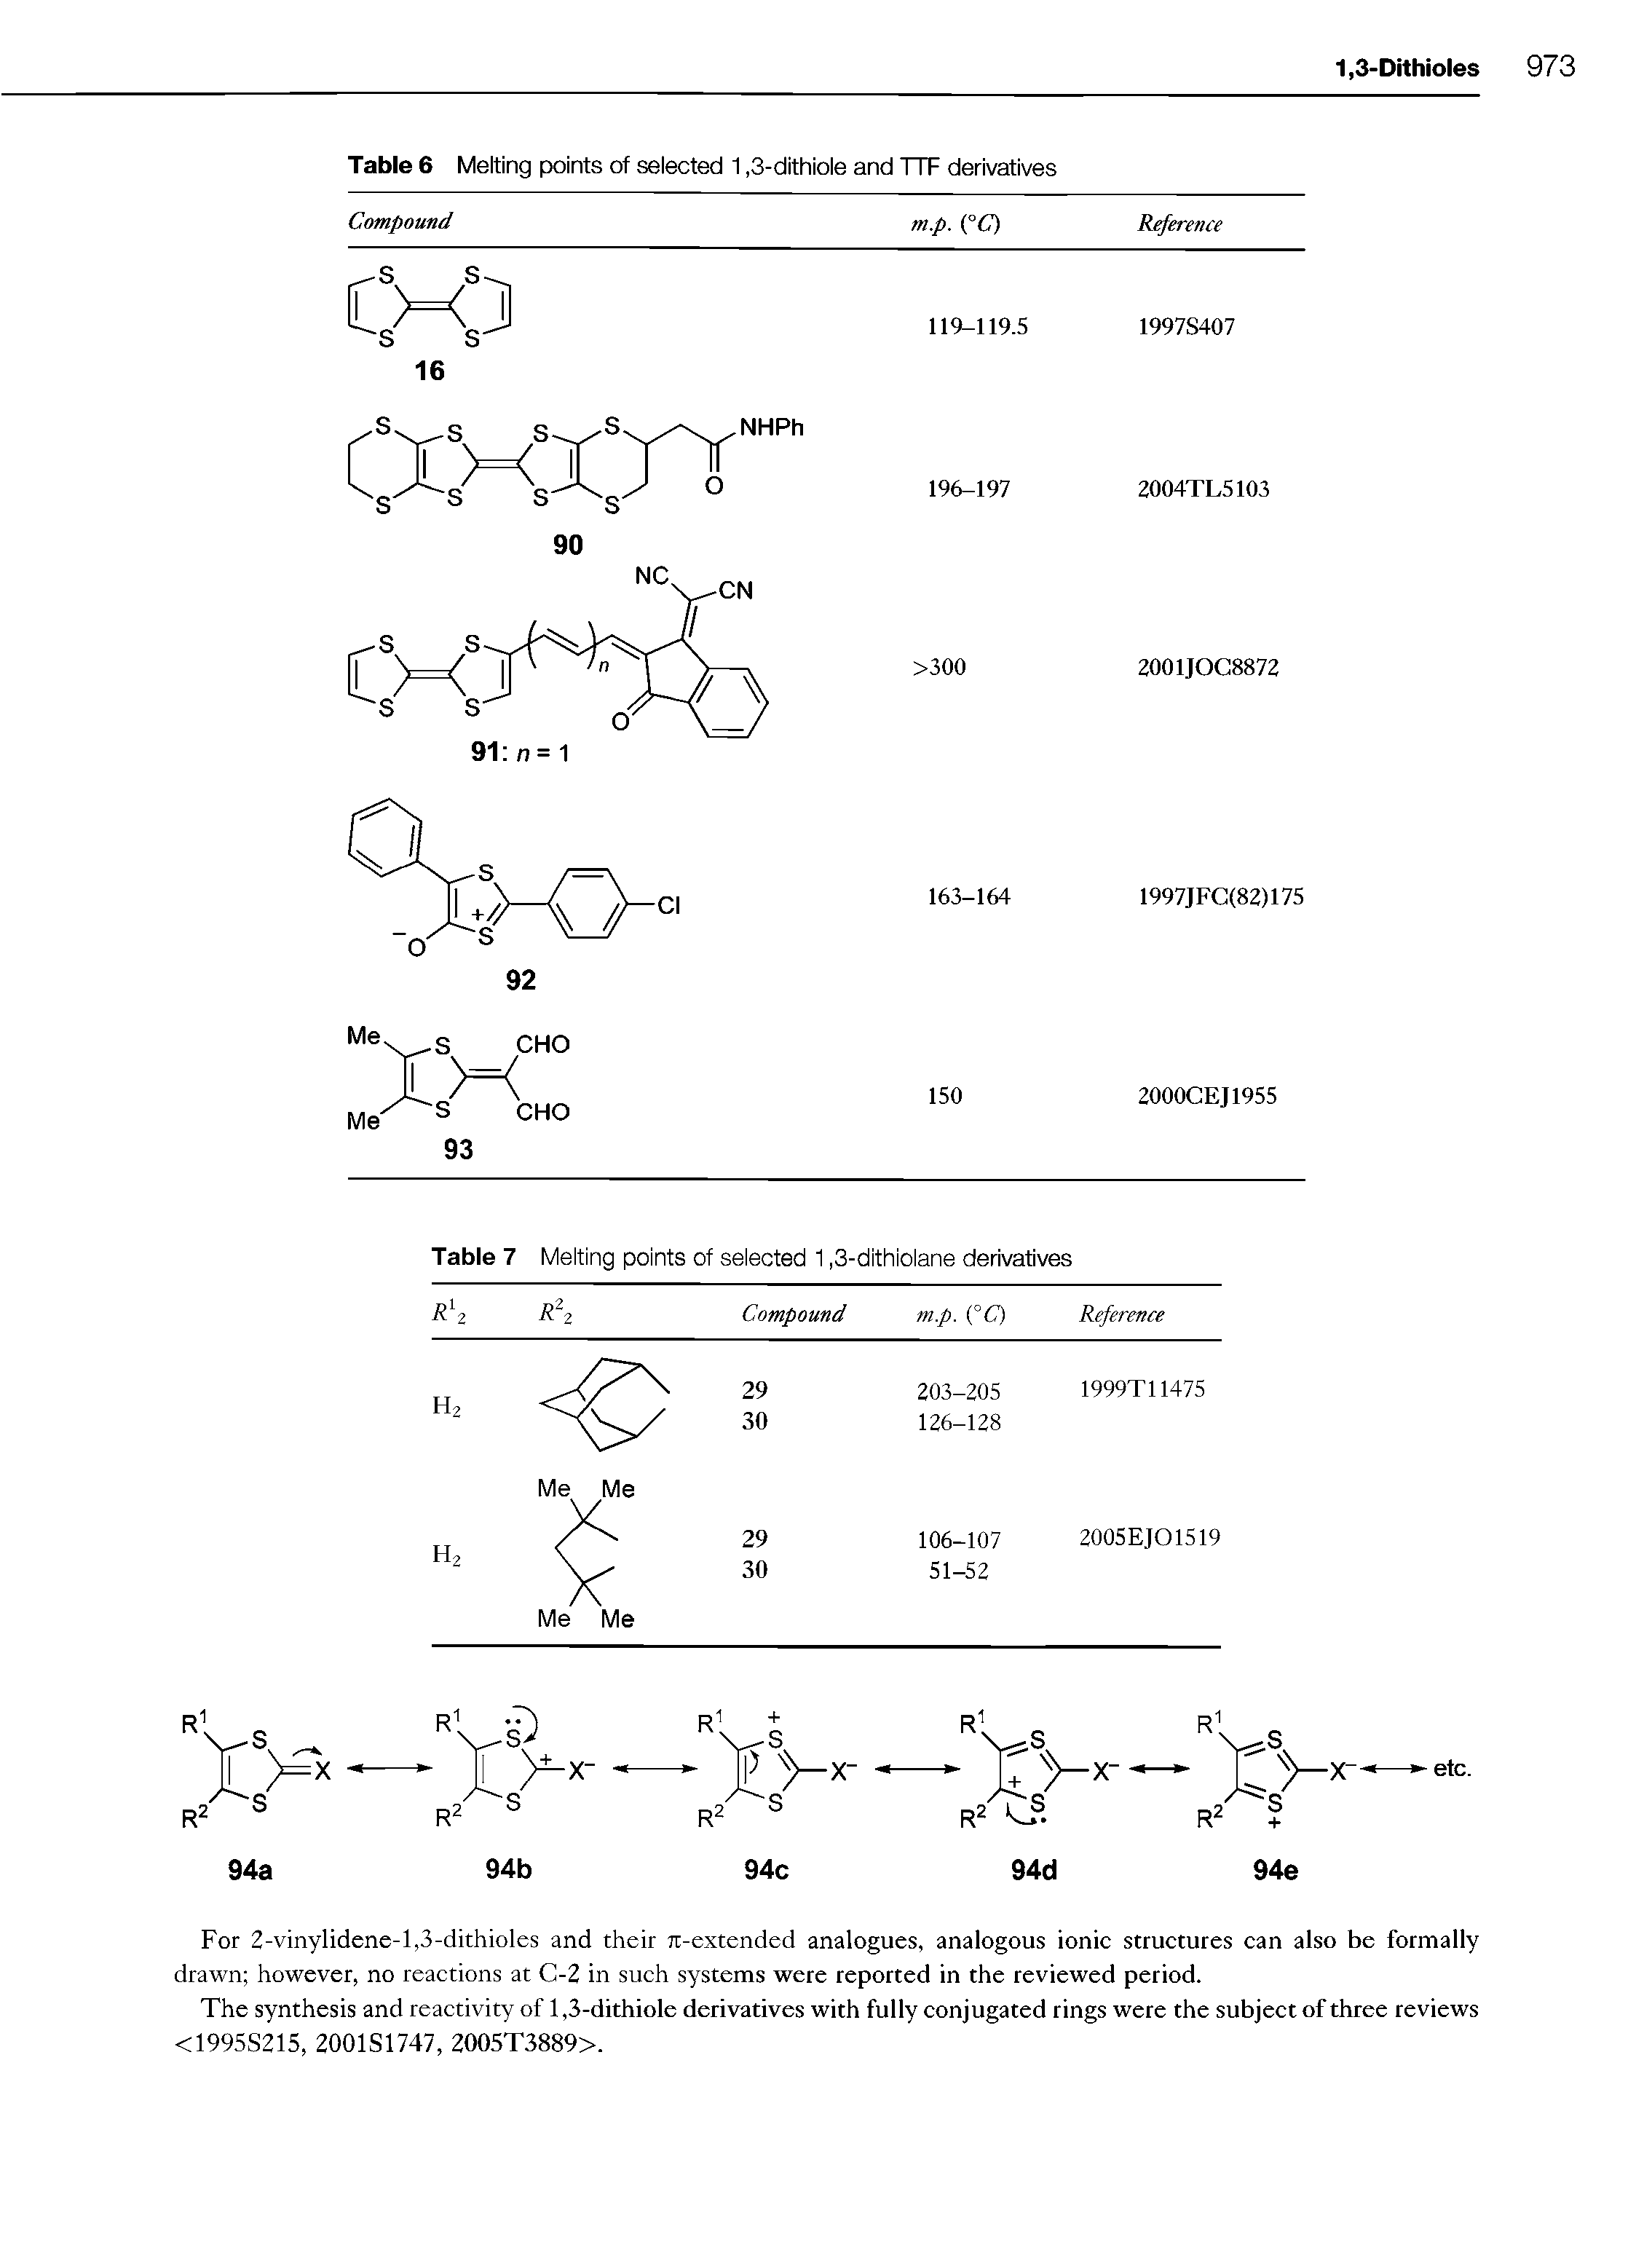 Table 7 Melting points of selected 1,3-dithiolane derivatives...